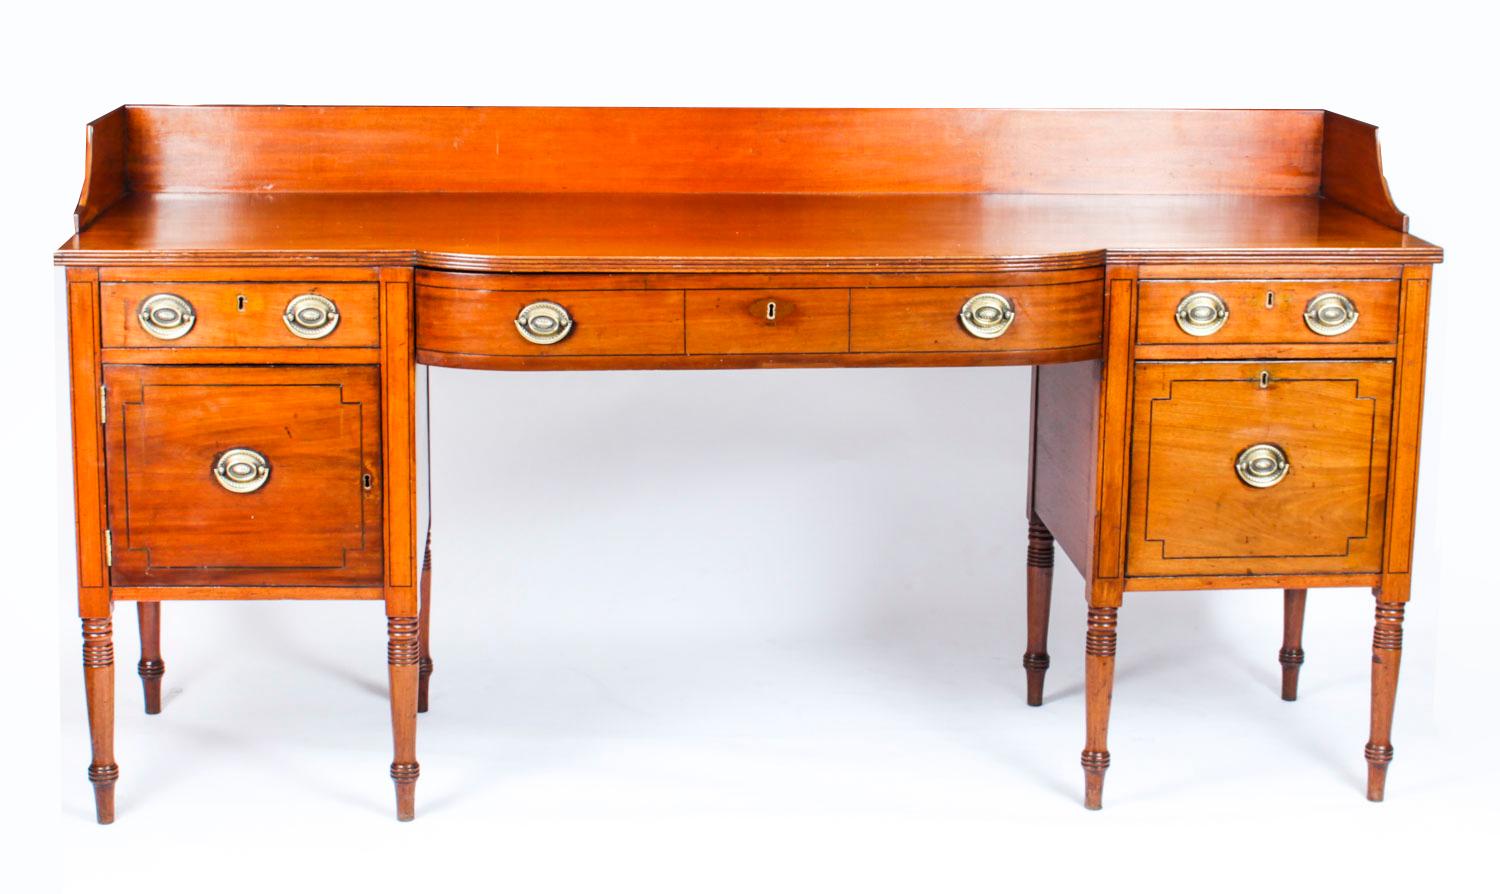 This is a superb antique flame mahogany and ebonized line inlaid bow front George III sideboard, circa 1790 in date.

The splendid shaped stage back is above three frieze drawers above a cupboard on the left with a cellarette drawer on the